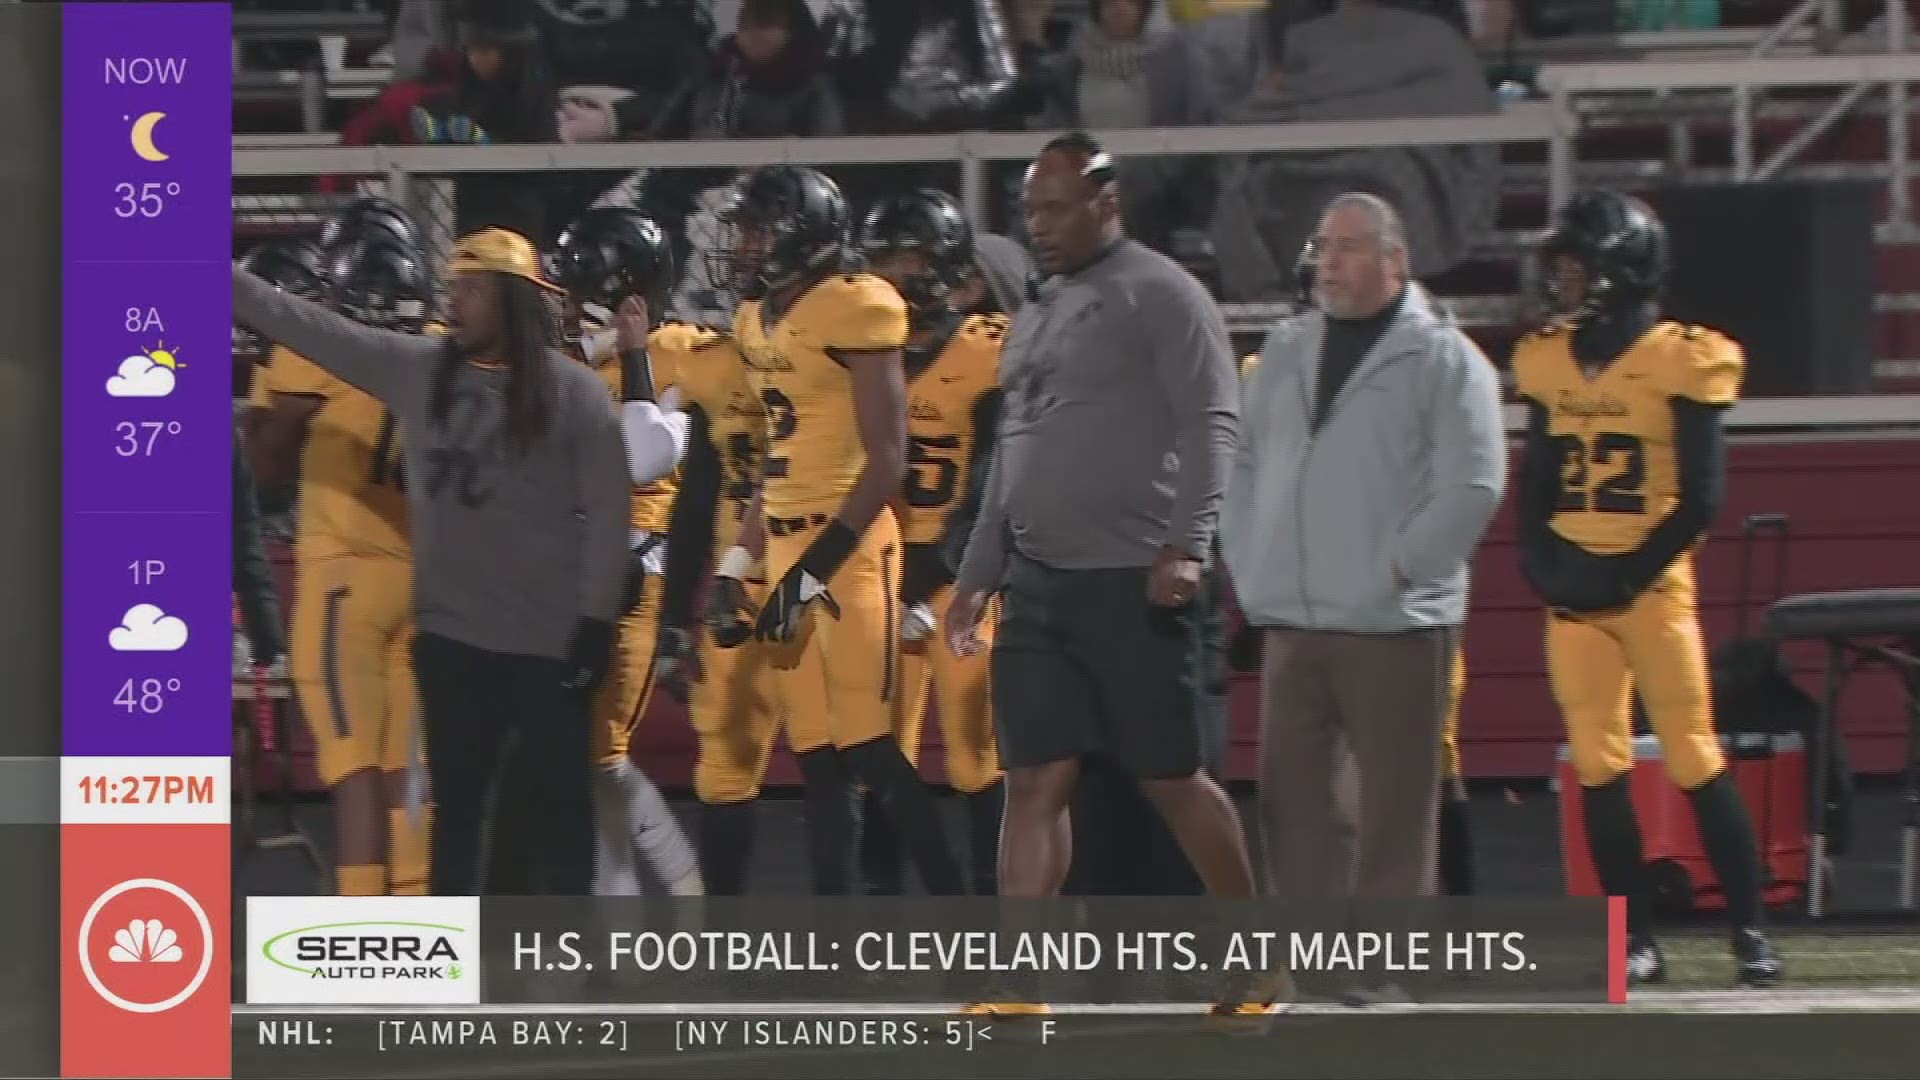 Cleveland Heights defeated Maple Heights on Friday, 21-12, to clinch its first playoff berth since 2015.